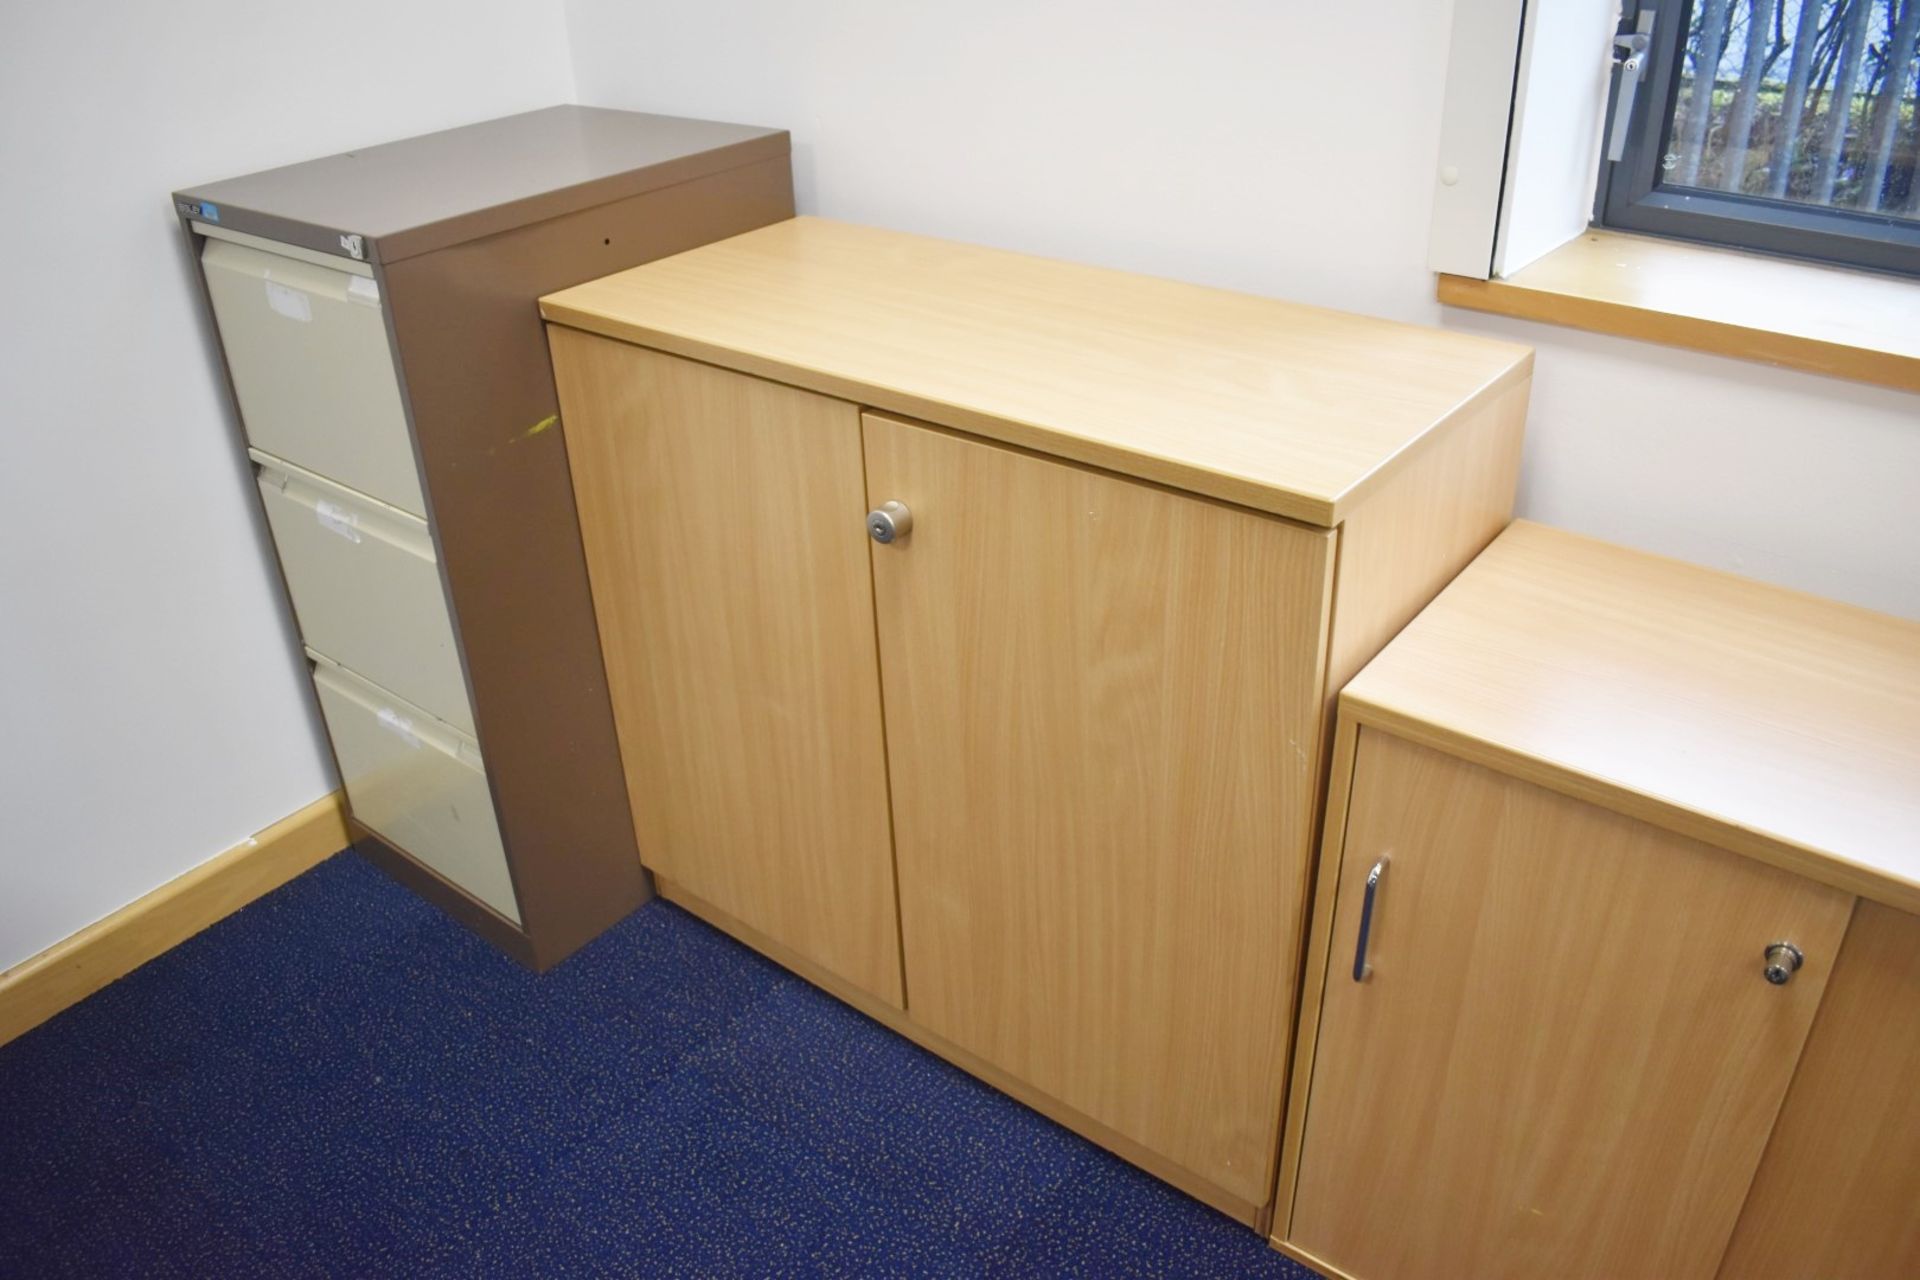 5 x Assorted Office Cabinets - Ref: FF177 D - CL544 - Location: Leeds, LS14Collections:This item - Image 4 of 4